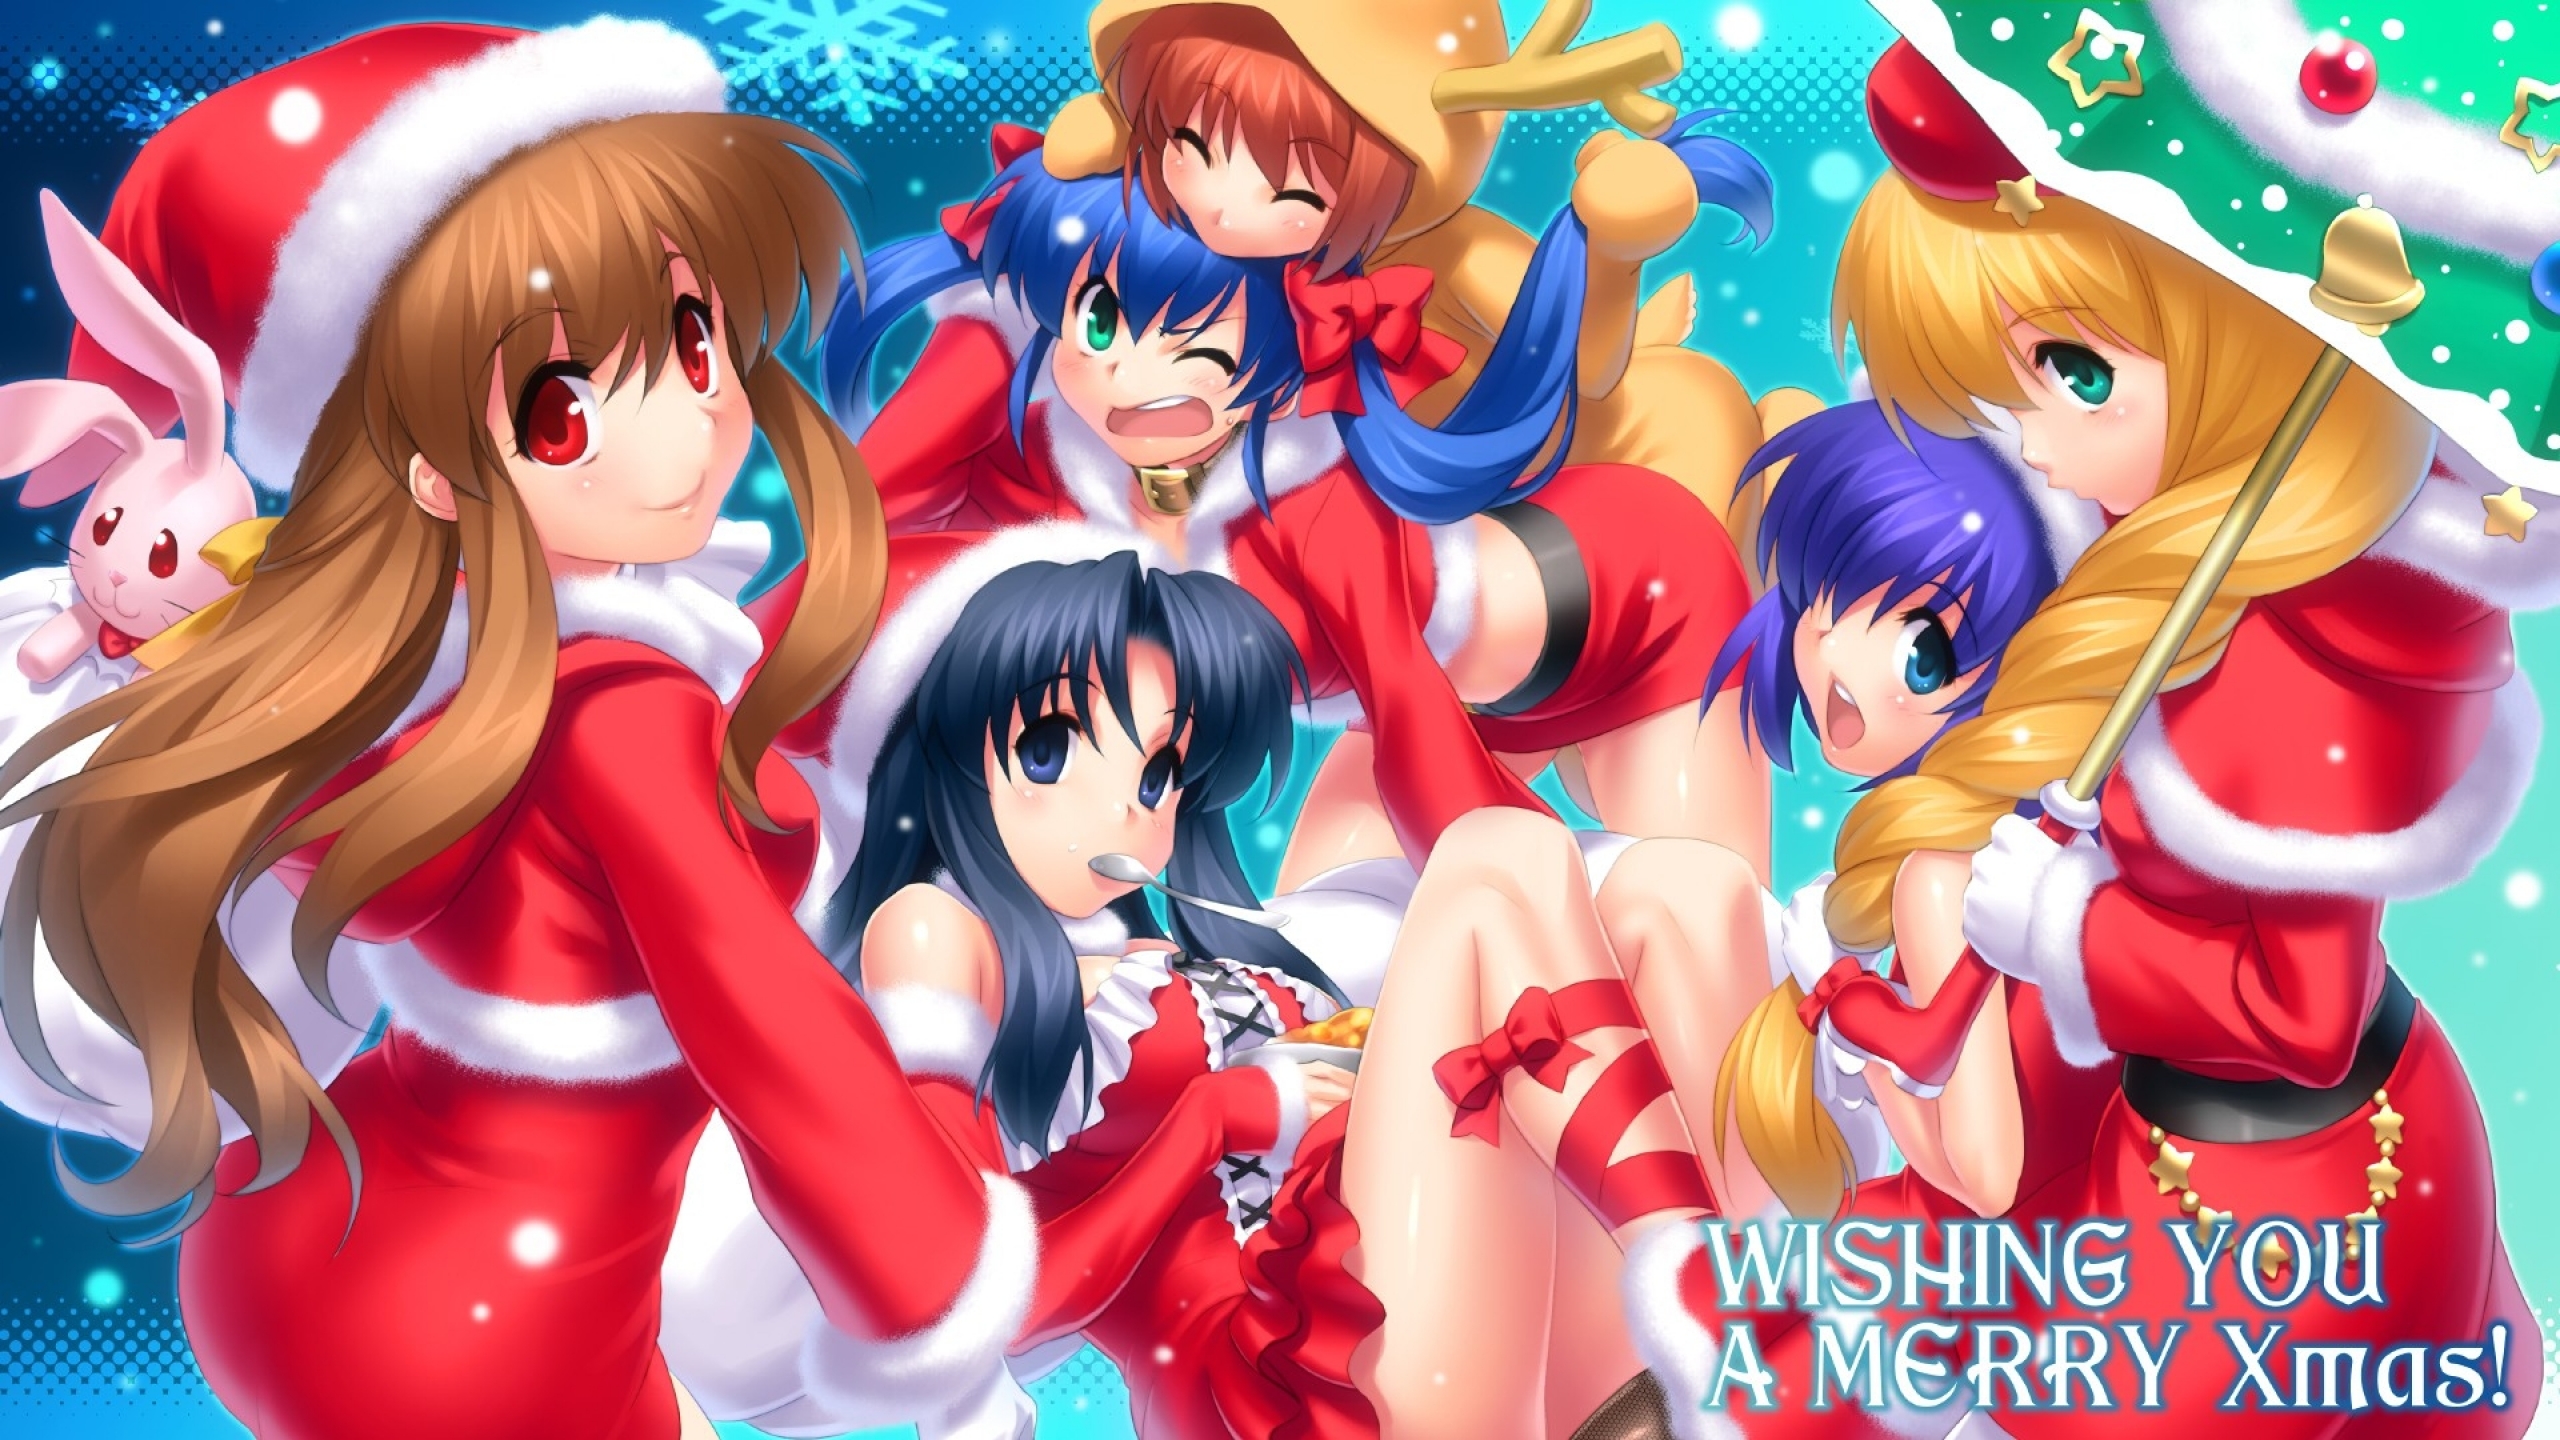 Christmas Girls With Blond Brown Hair Celebration Of Christmas And New Year Anime Christmas Picture Desktop Hd Wallpapers 2560x1440 Wallpapers13 Com